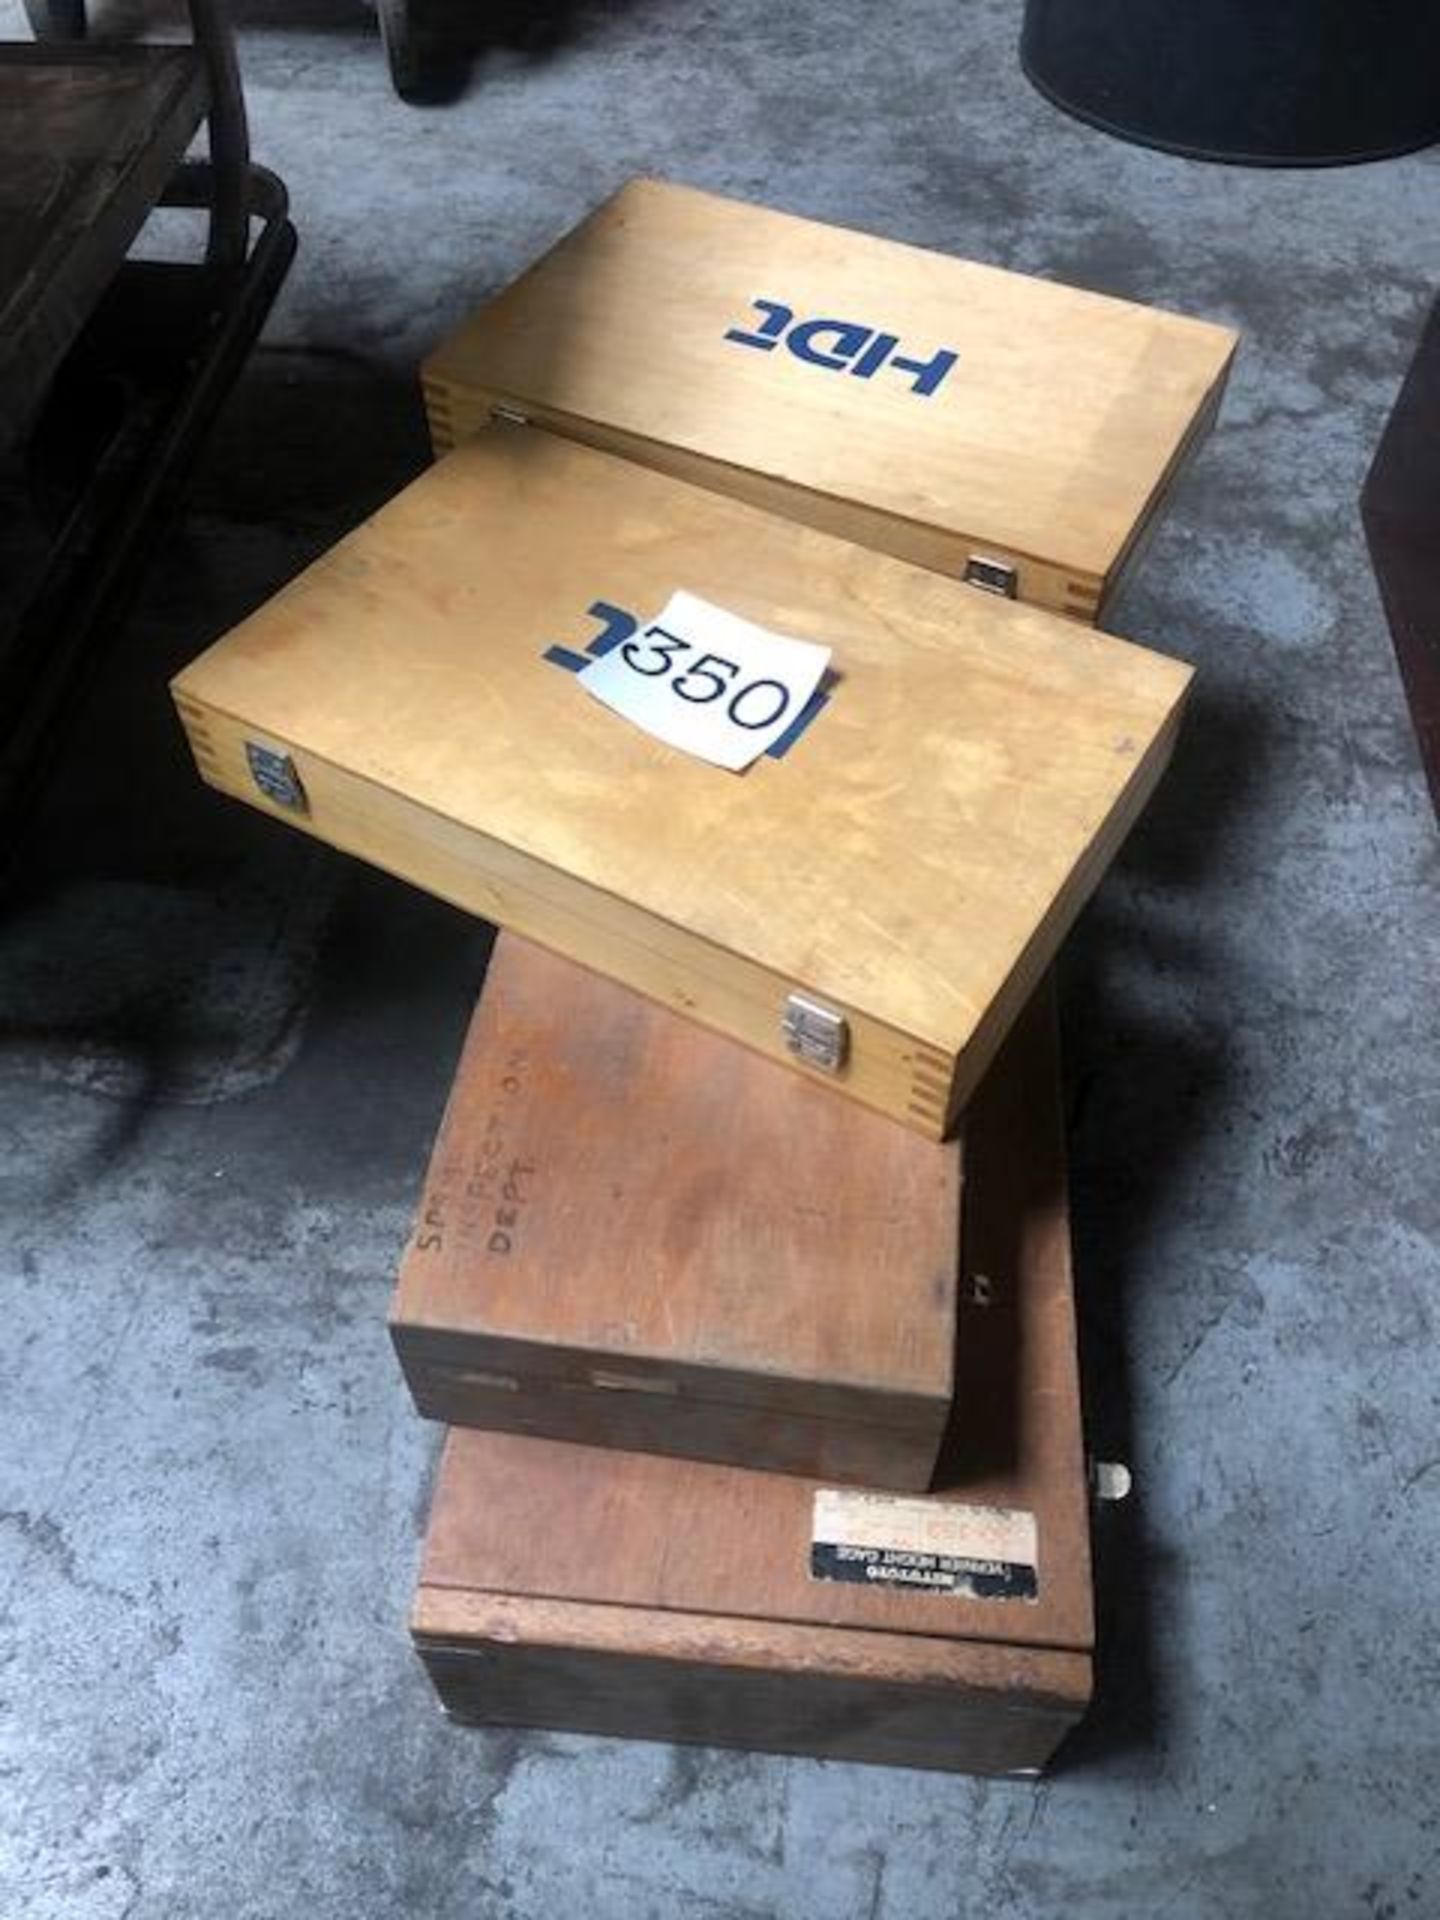 Wood Inspection Equipment - Empty Boxes